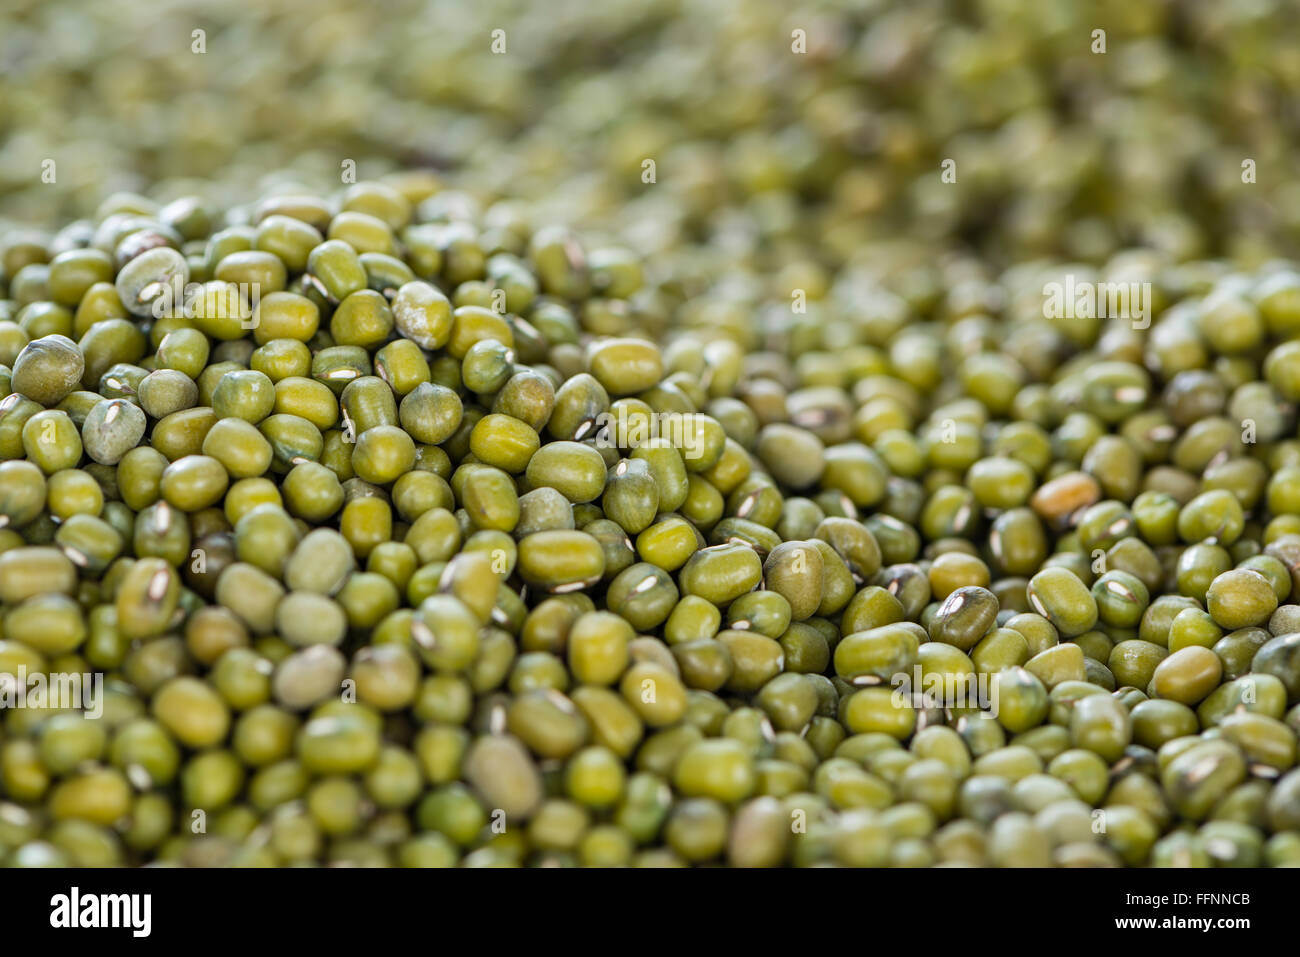 Mung Beans as detailed close-up shot for use as background or as texture Stock Photo